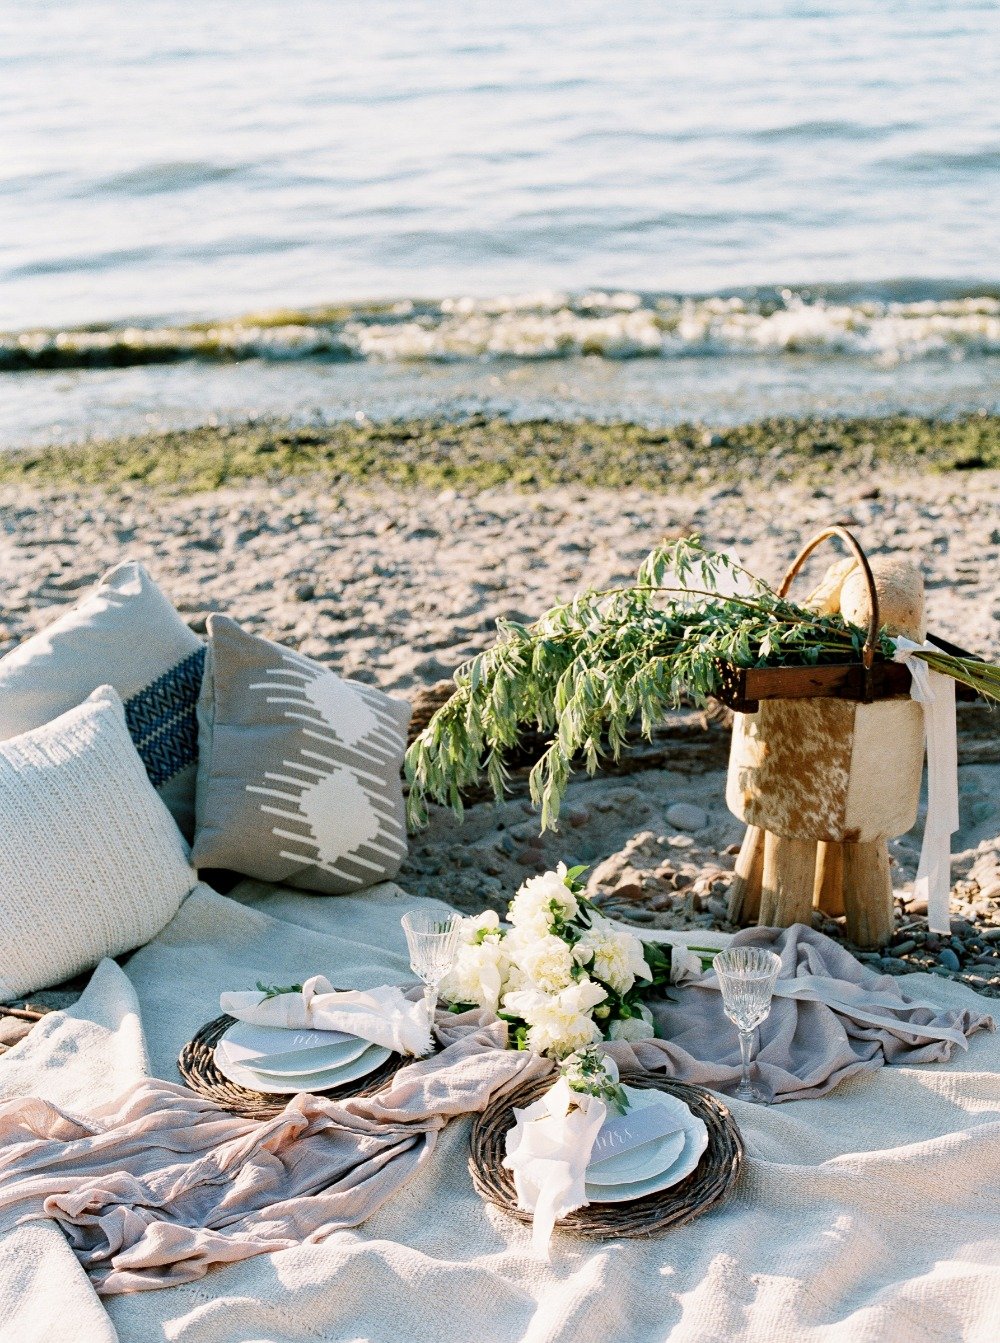 Cozy beach picnic for two